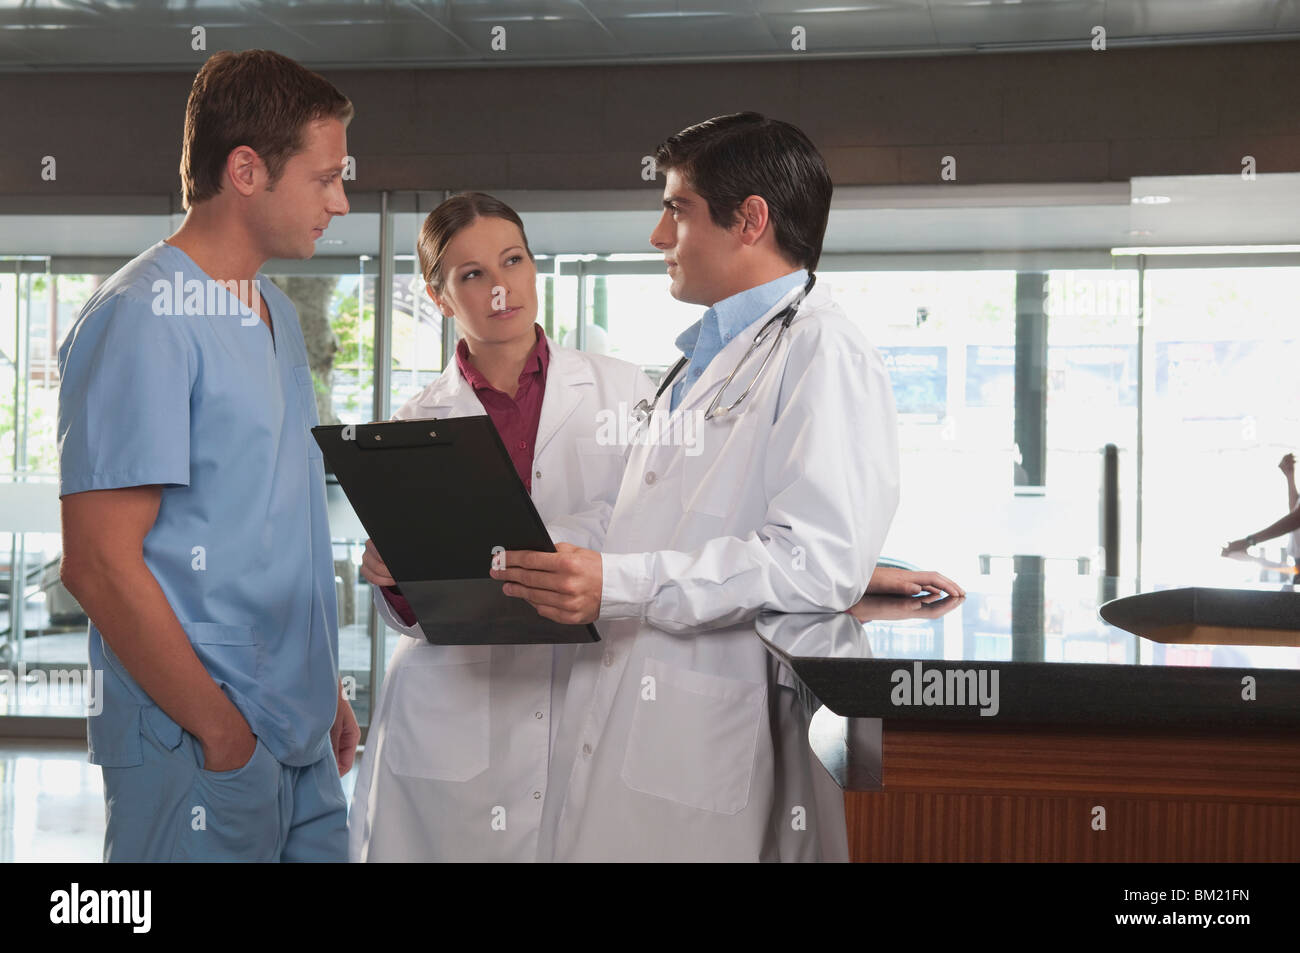 Doctors discussing with a male nurse Stock Photo